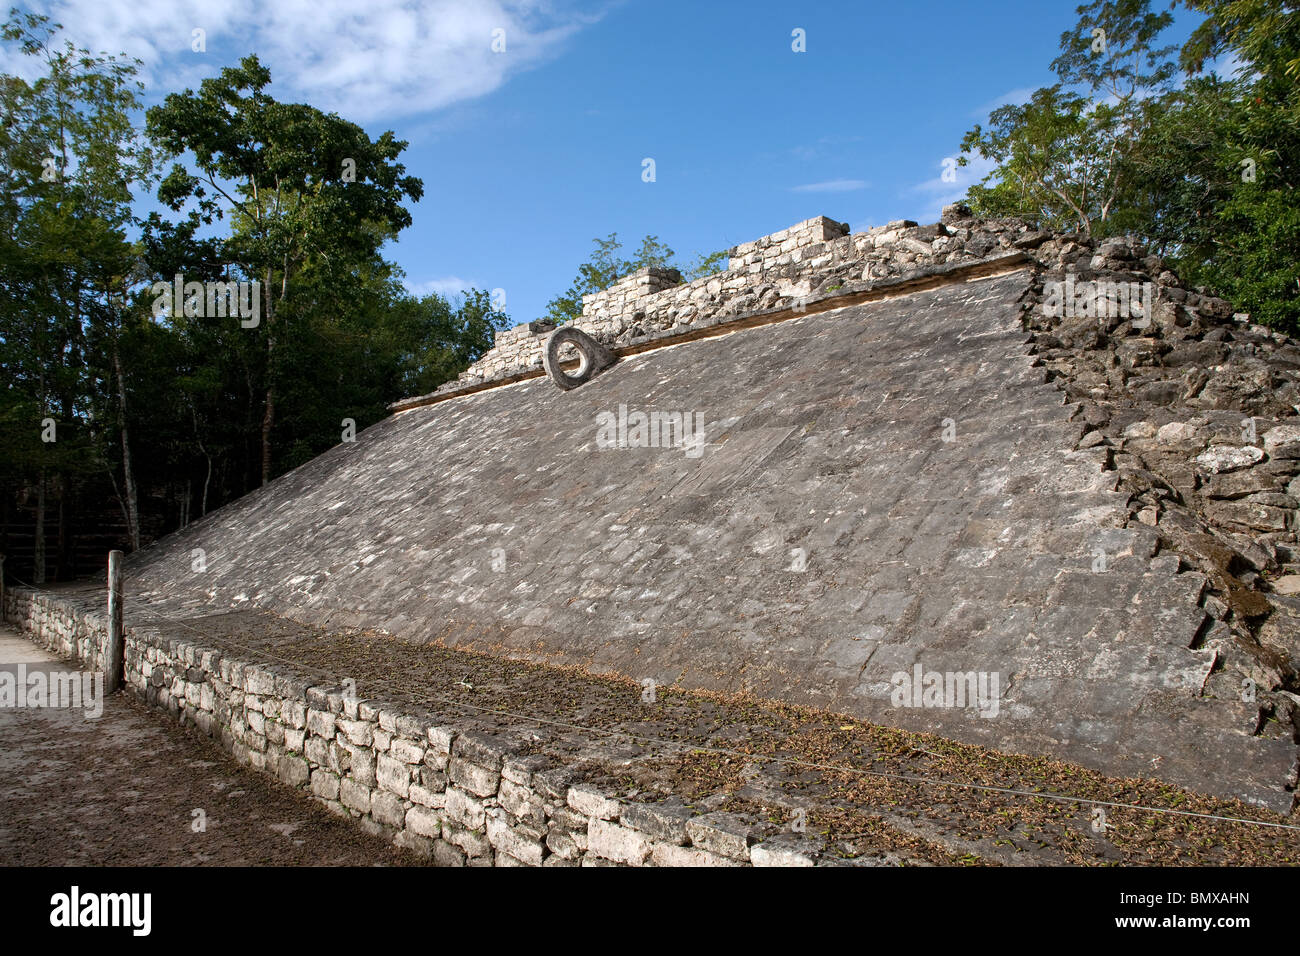 Ancient Mayan Soccer and Basketball Stadium At The Archaeological Site Coba Quintana Roo Mexico Stock Photo